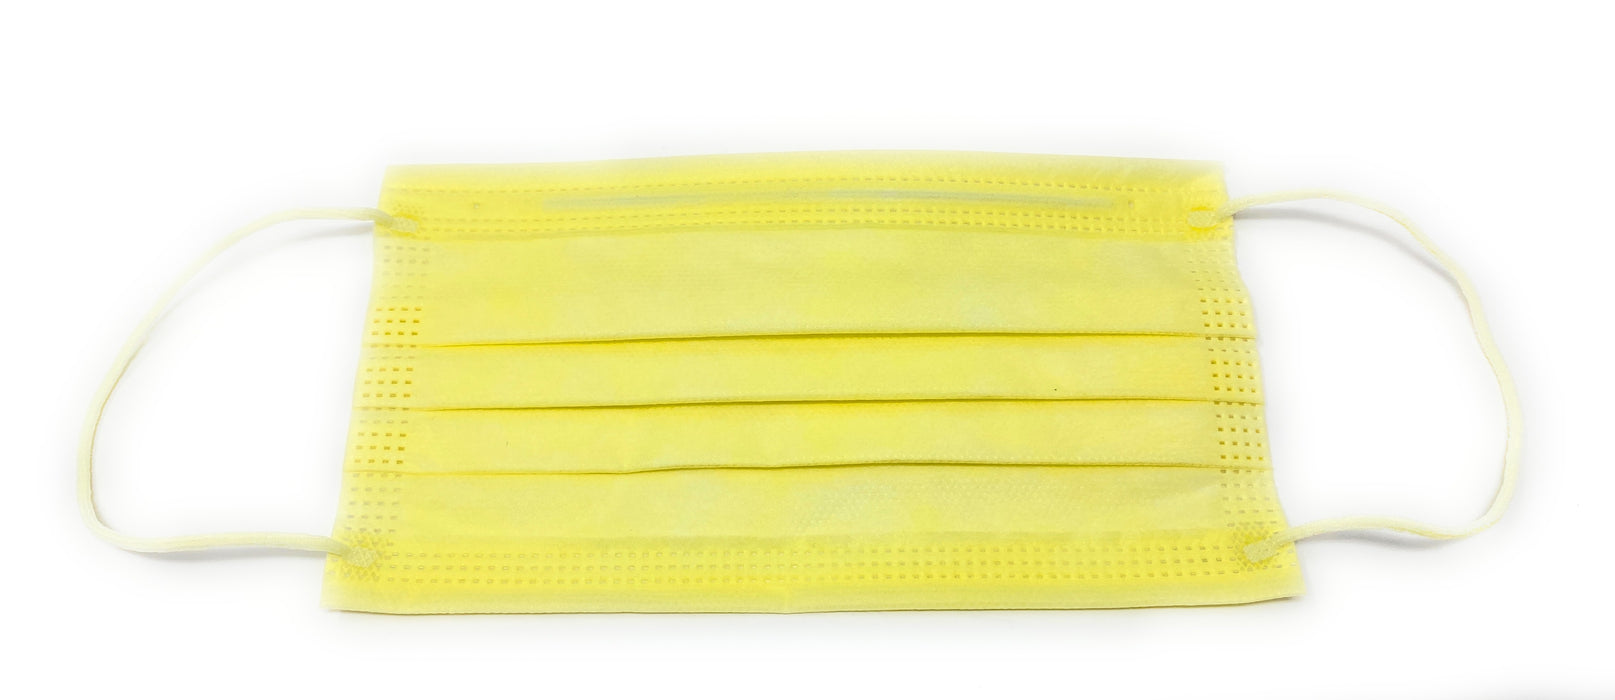 GO COLORS! Disposable 4 Layer Face Mask with 98% filtration, Yellow - Box of 50